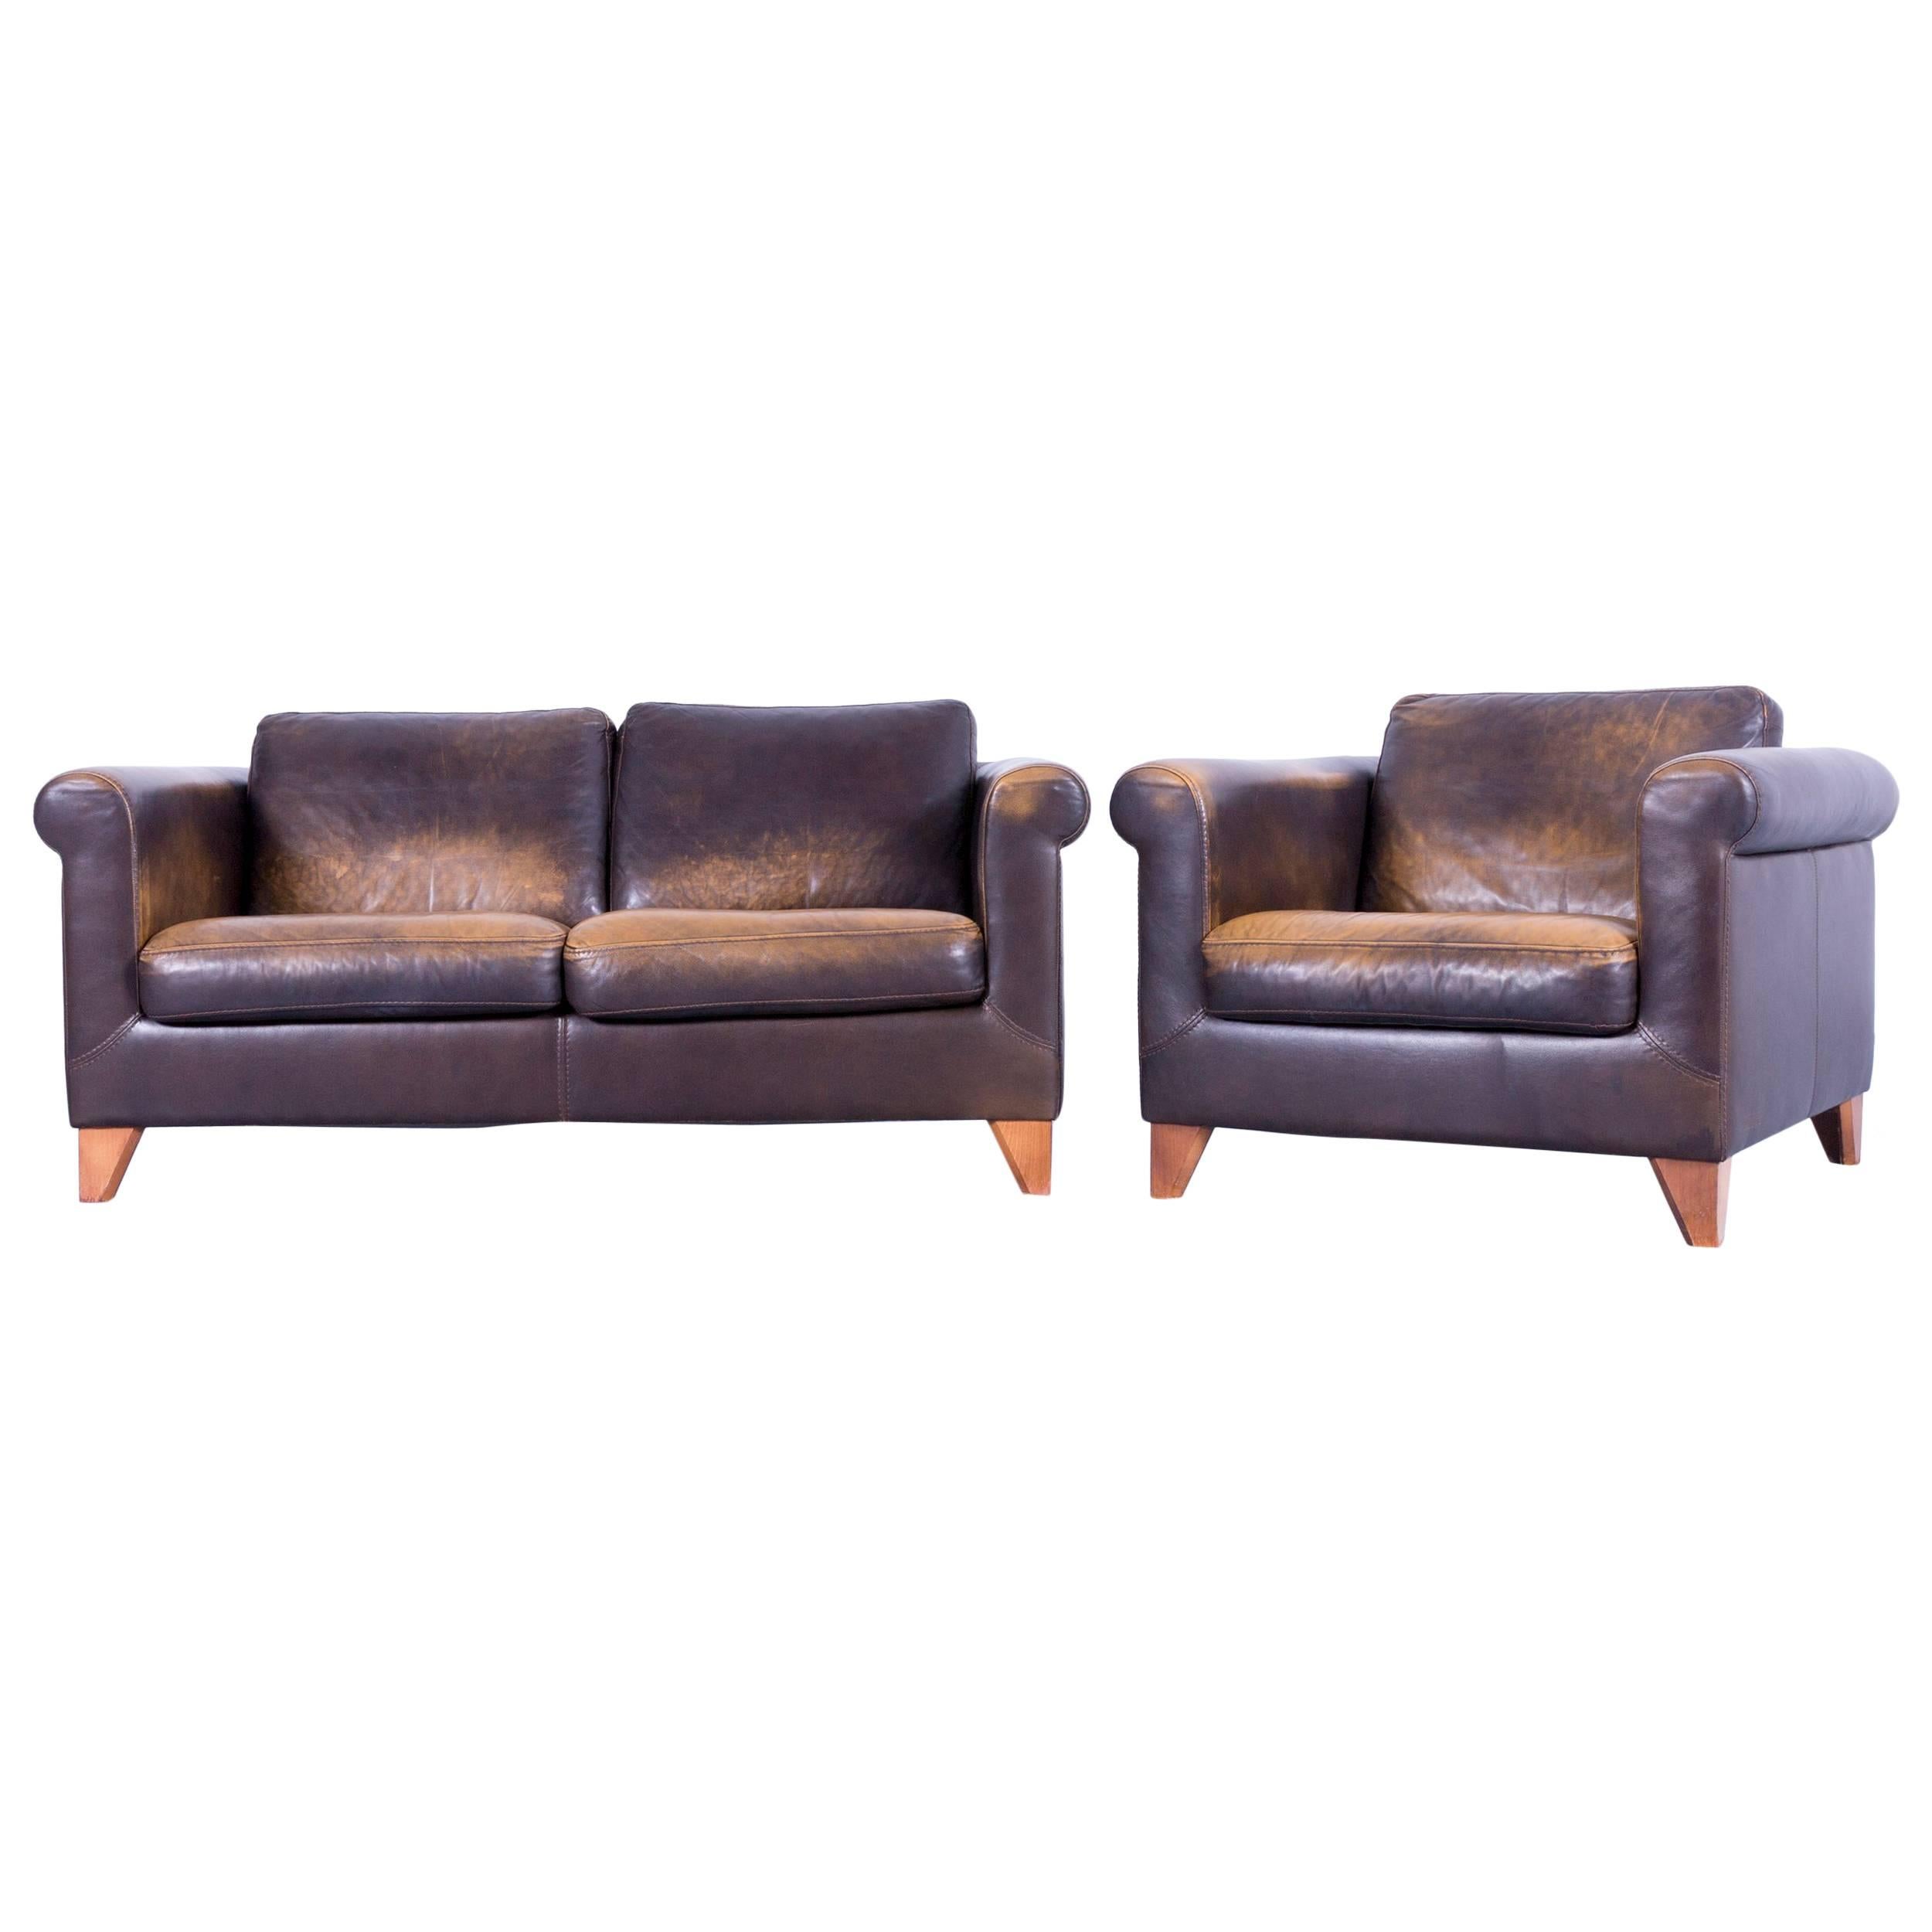 Machalke Designer Two-Seat Sofa Set and Armchair Leather Brown Couch Modern